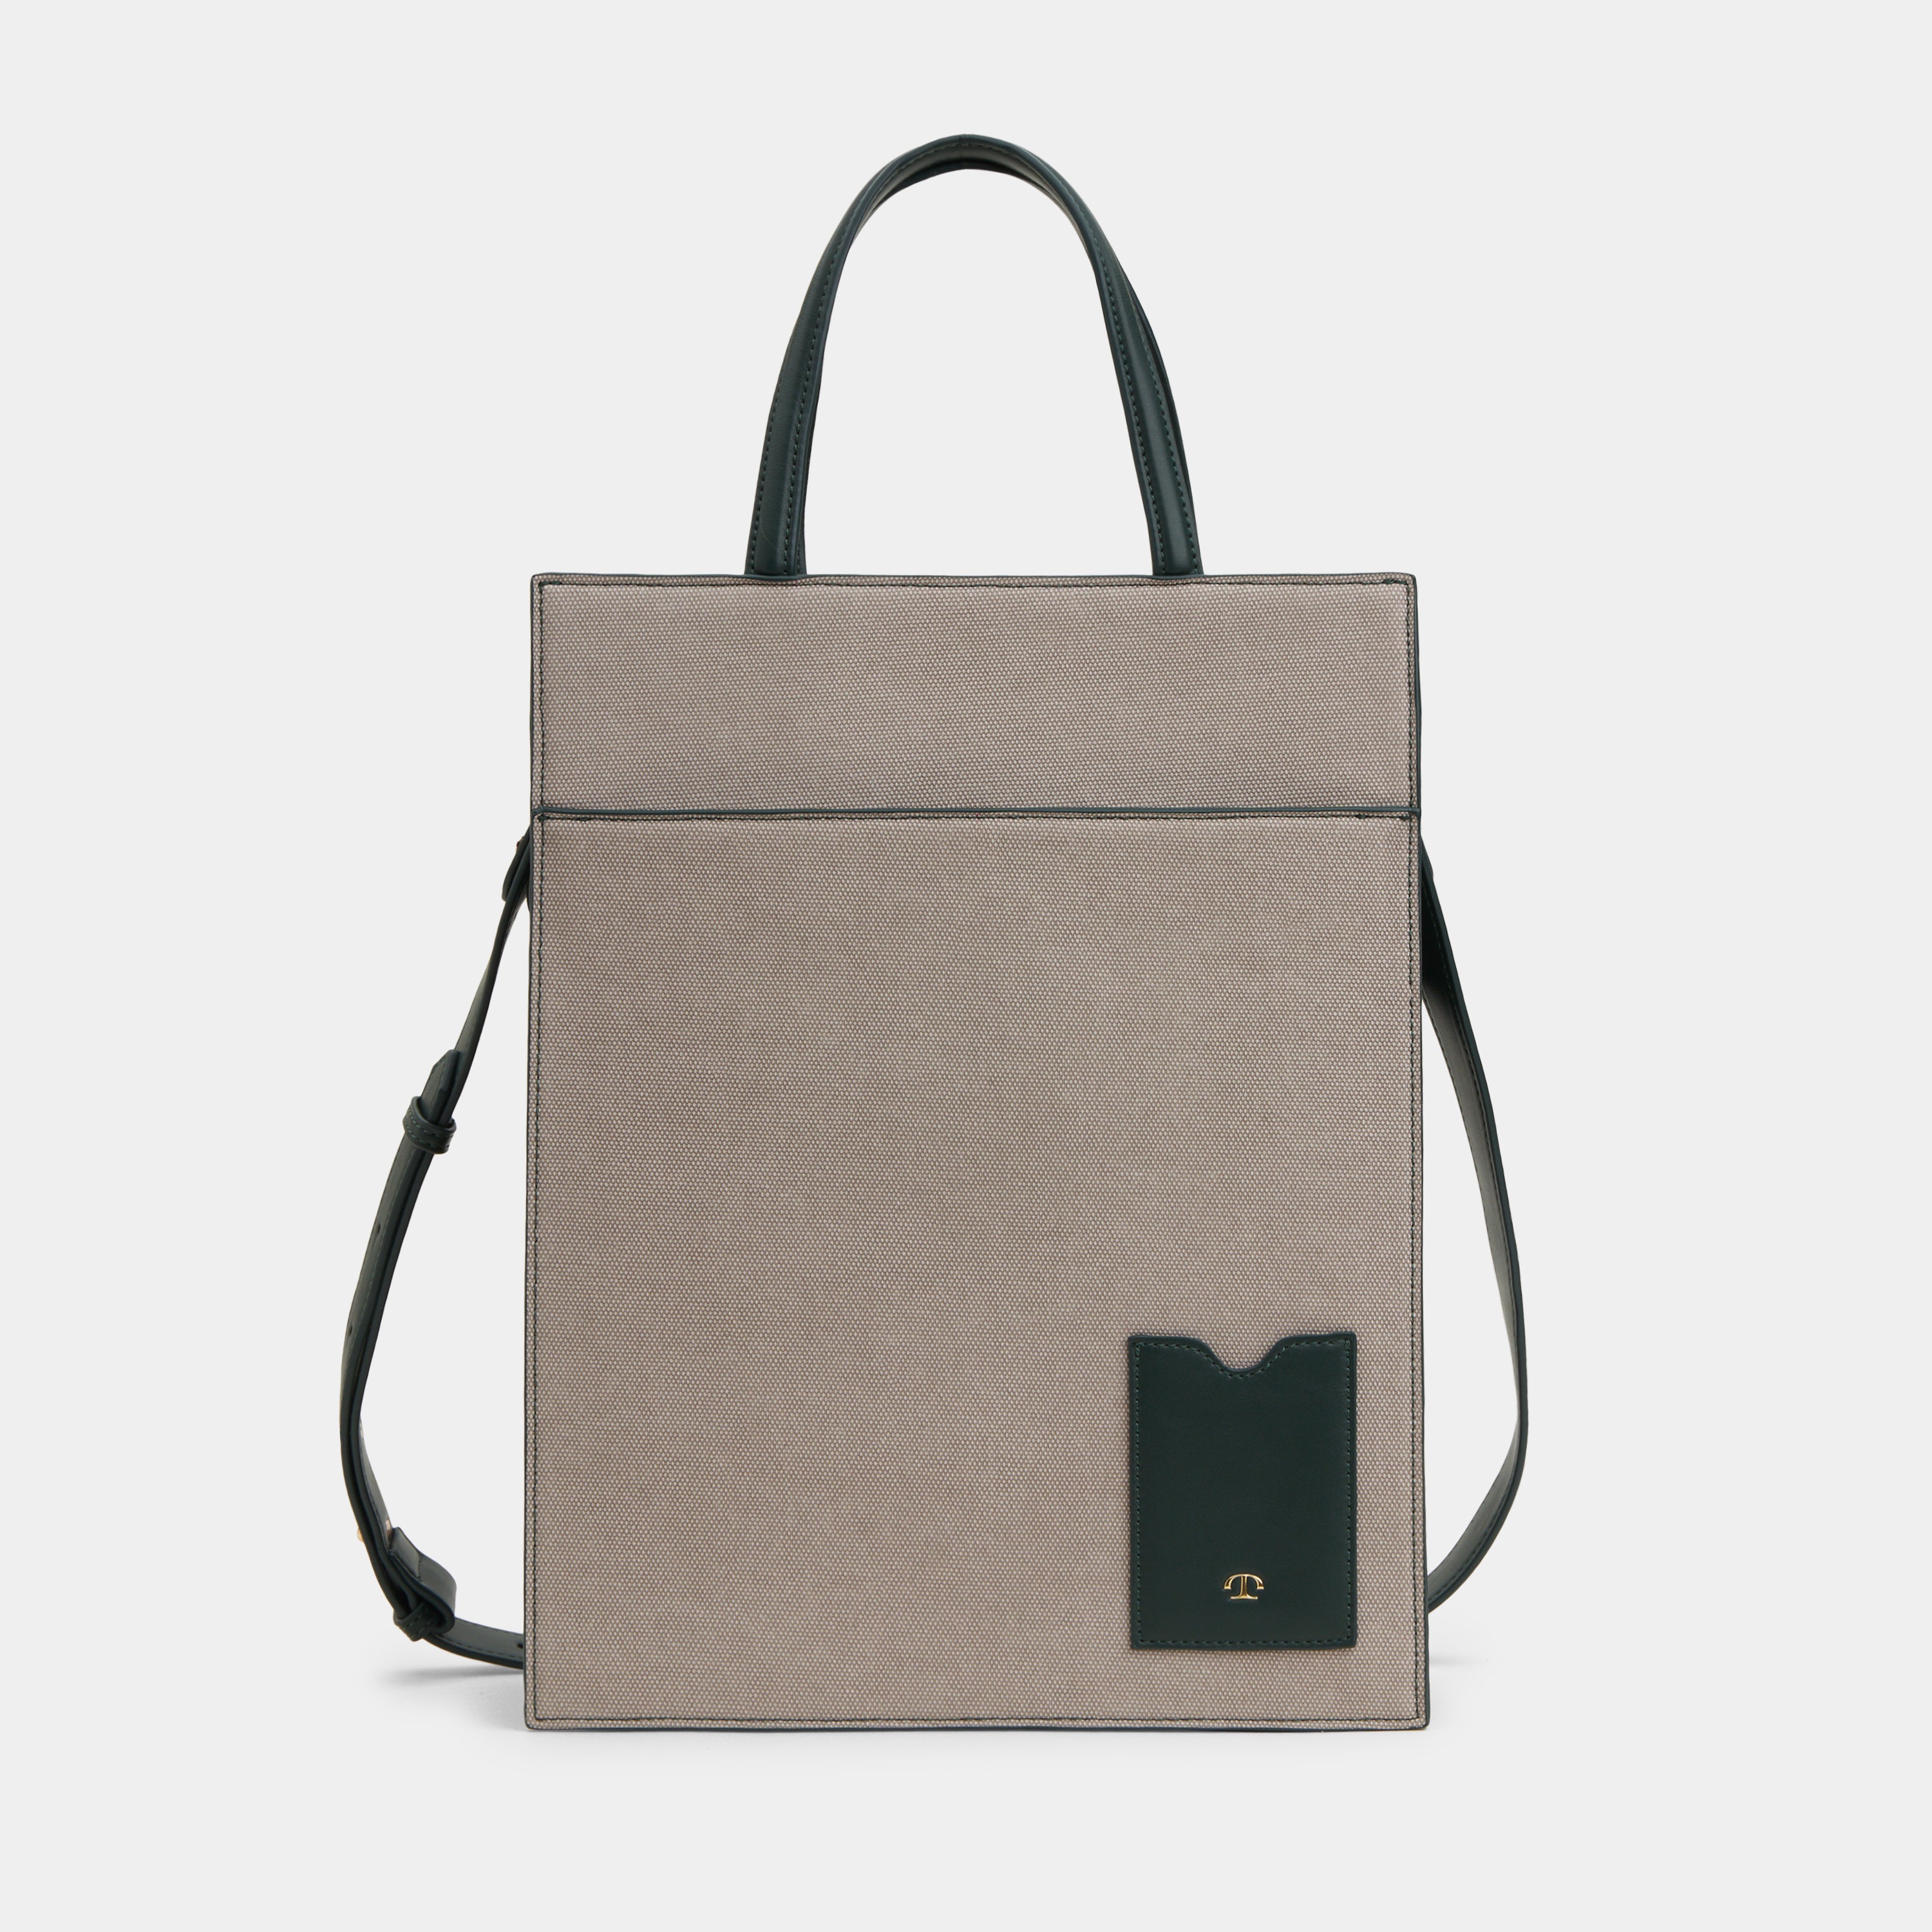 The City Tote Large Tall (Neutral Series) Compartment Bag